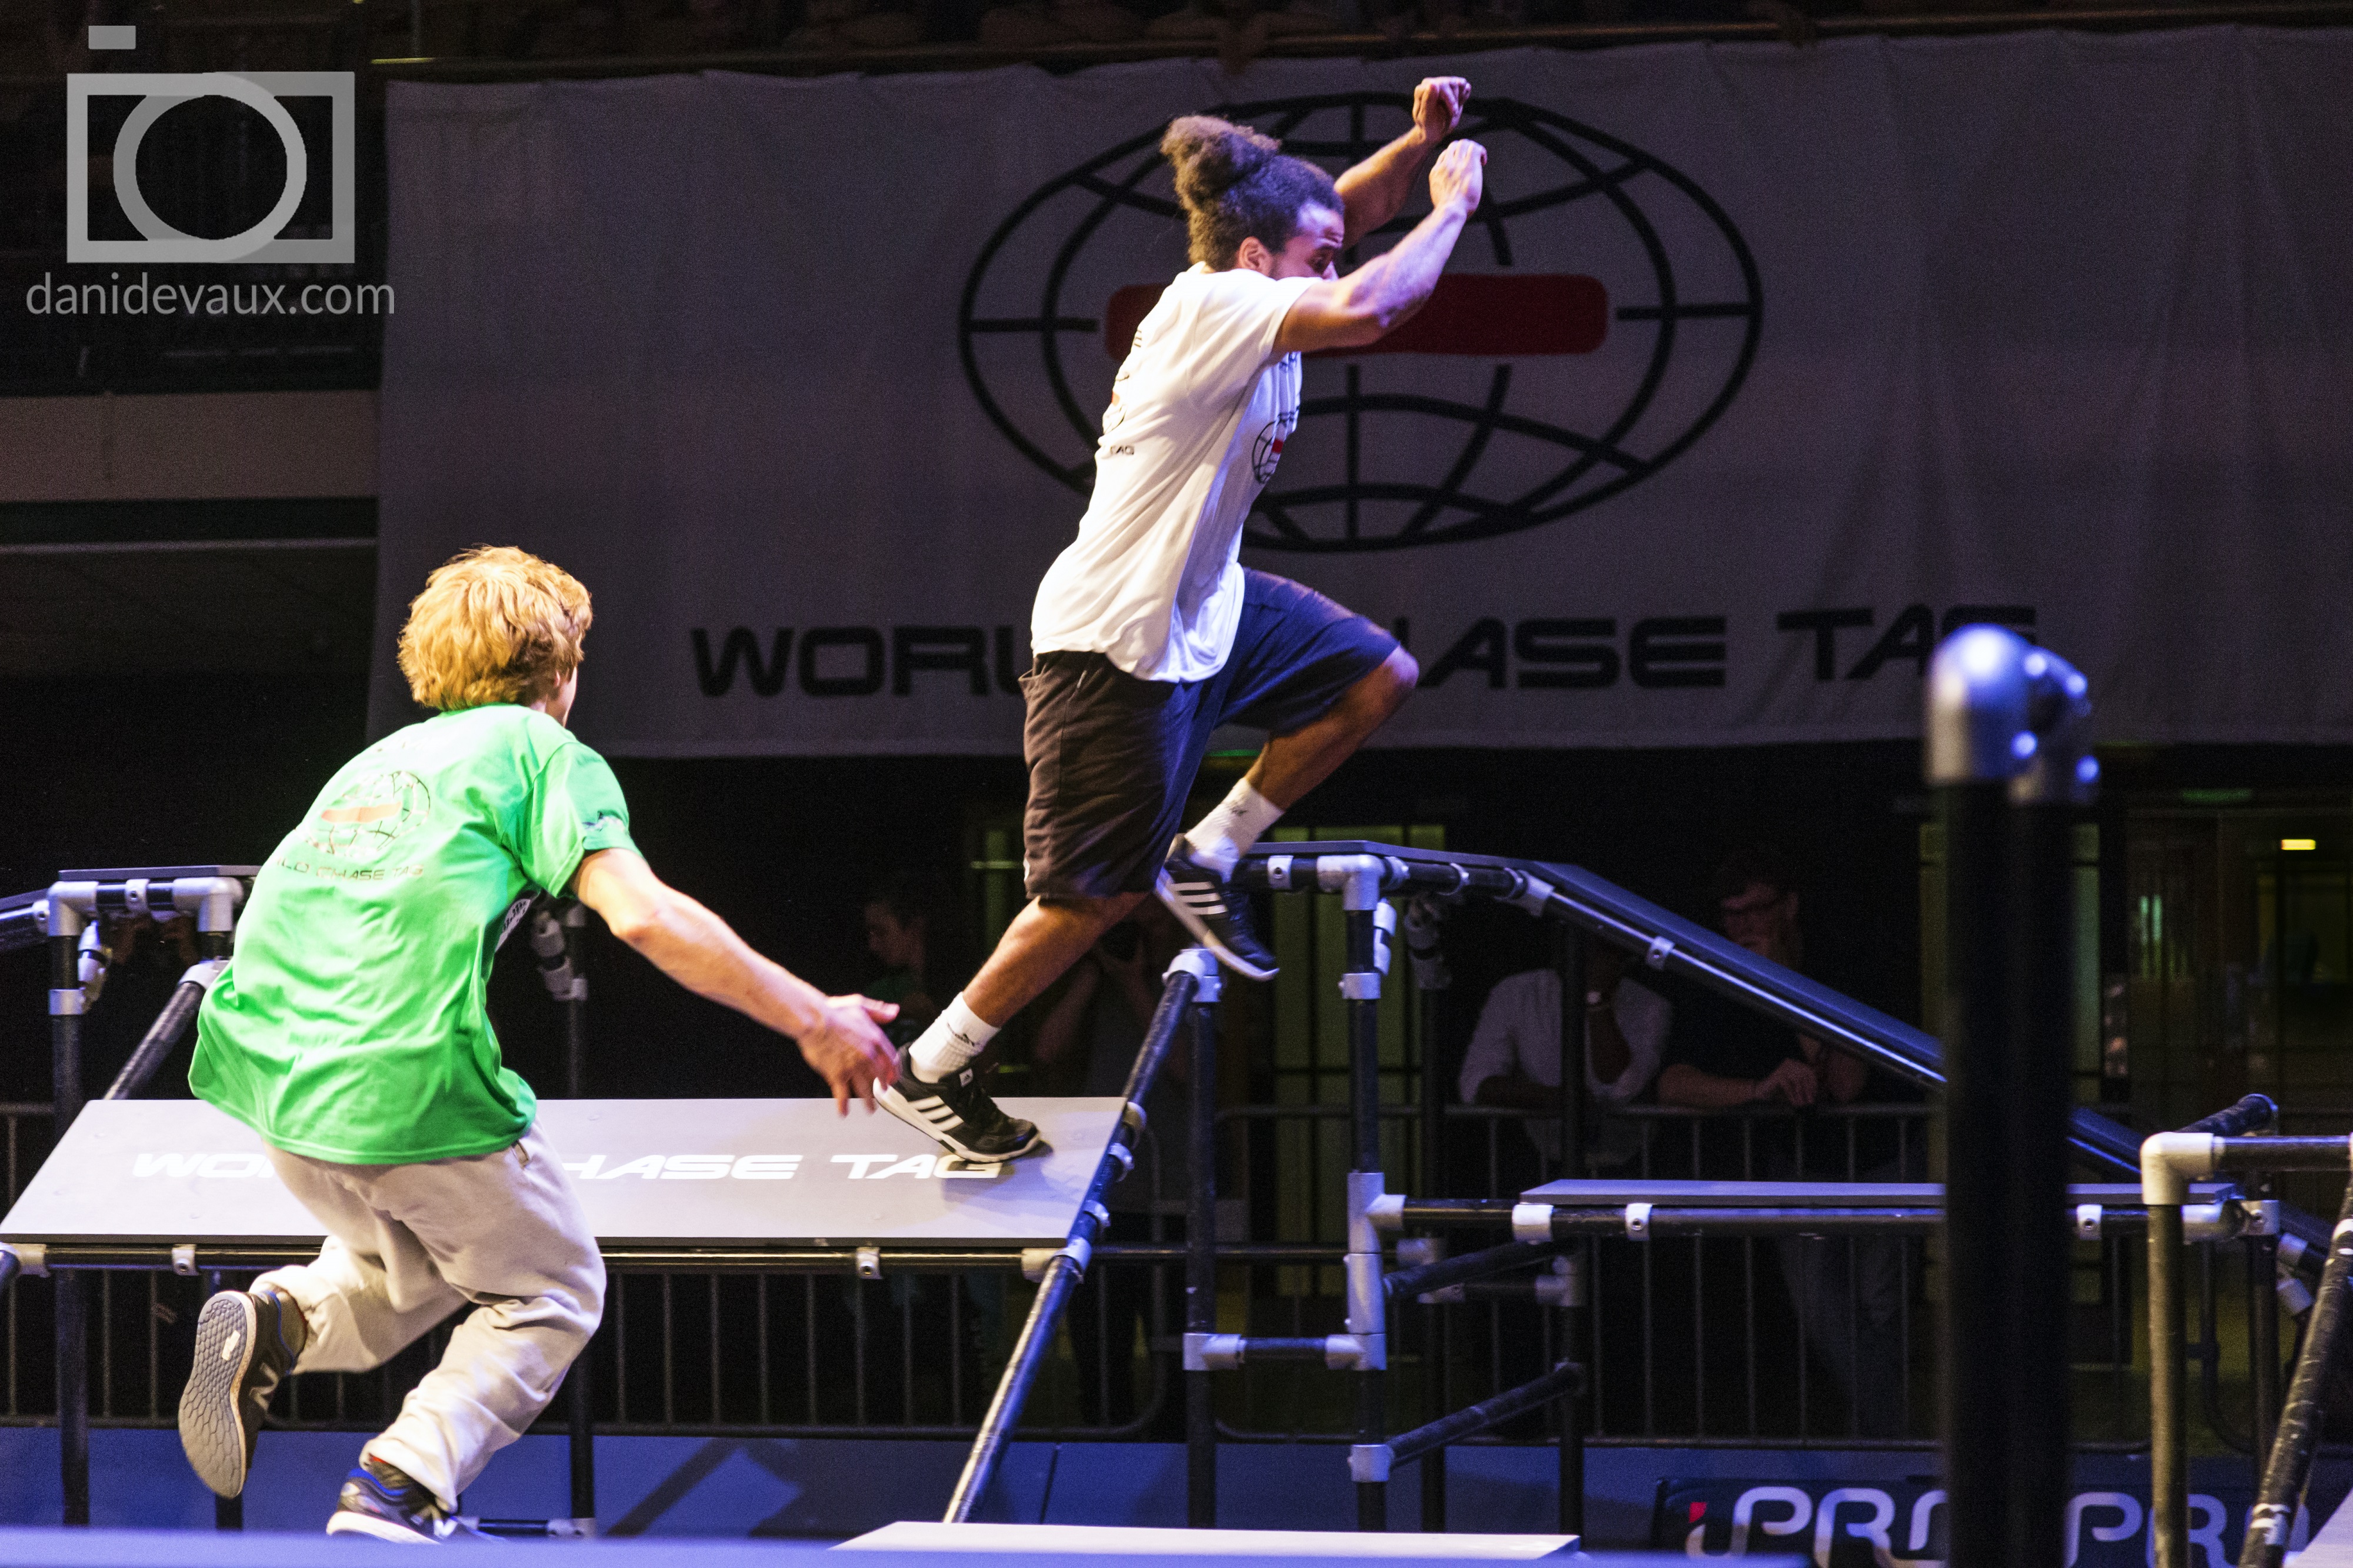 Some of the WCT action as a competitor leaps